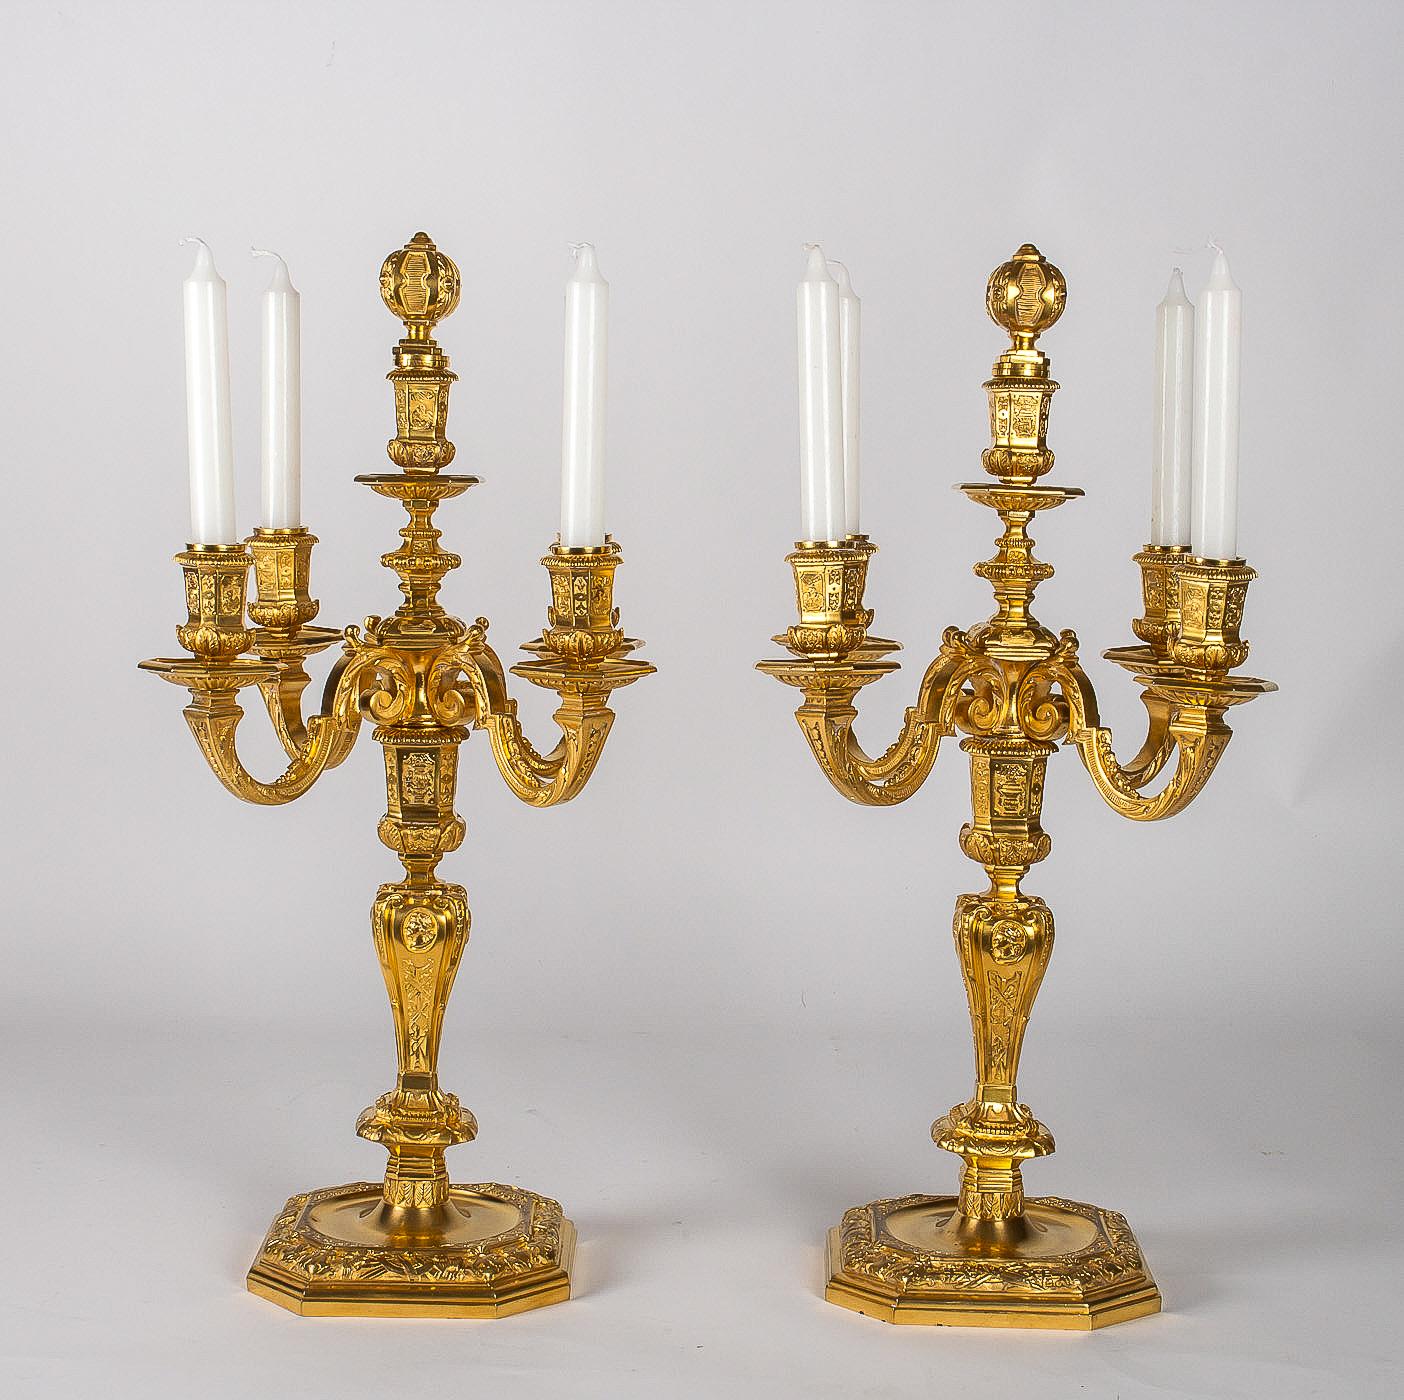 by H Voisenet, Large Pair of Louis XIV Style Ormolu Candelabras, circa 1880-1900 11